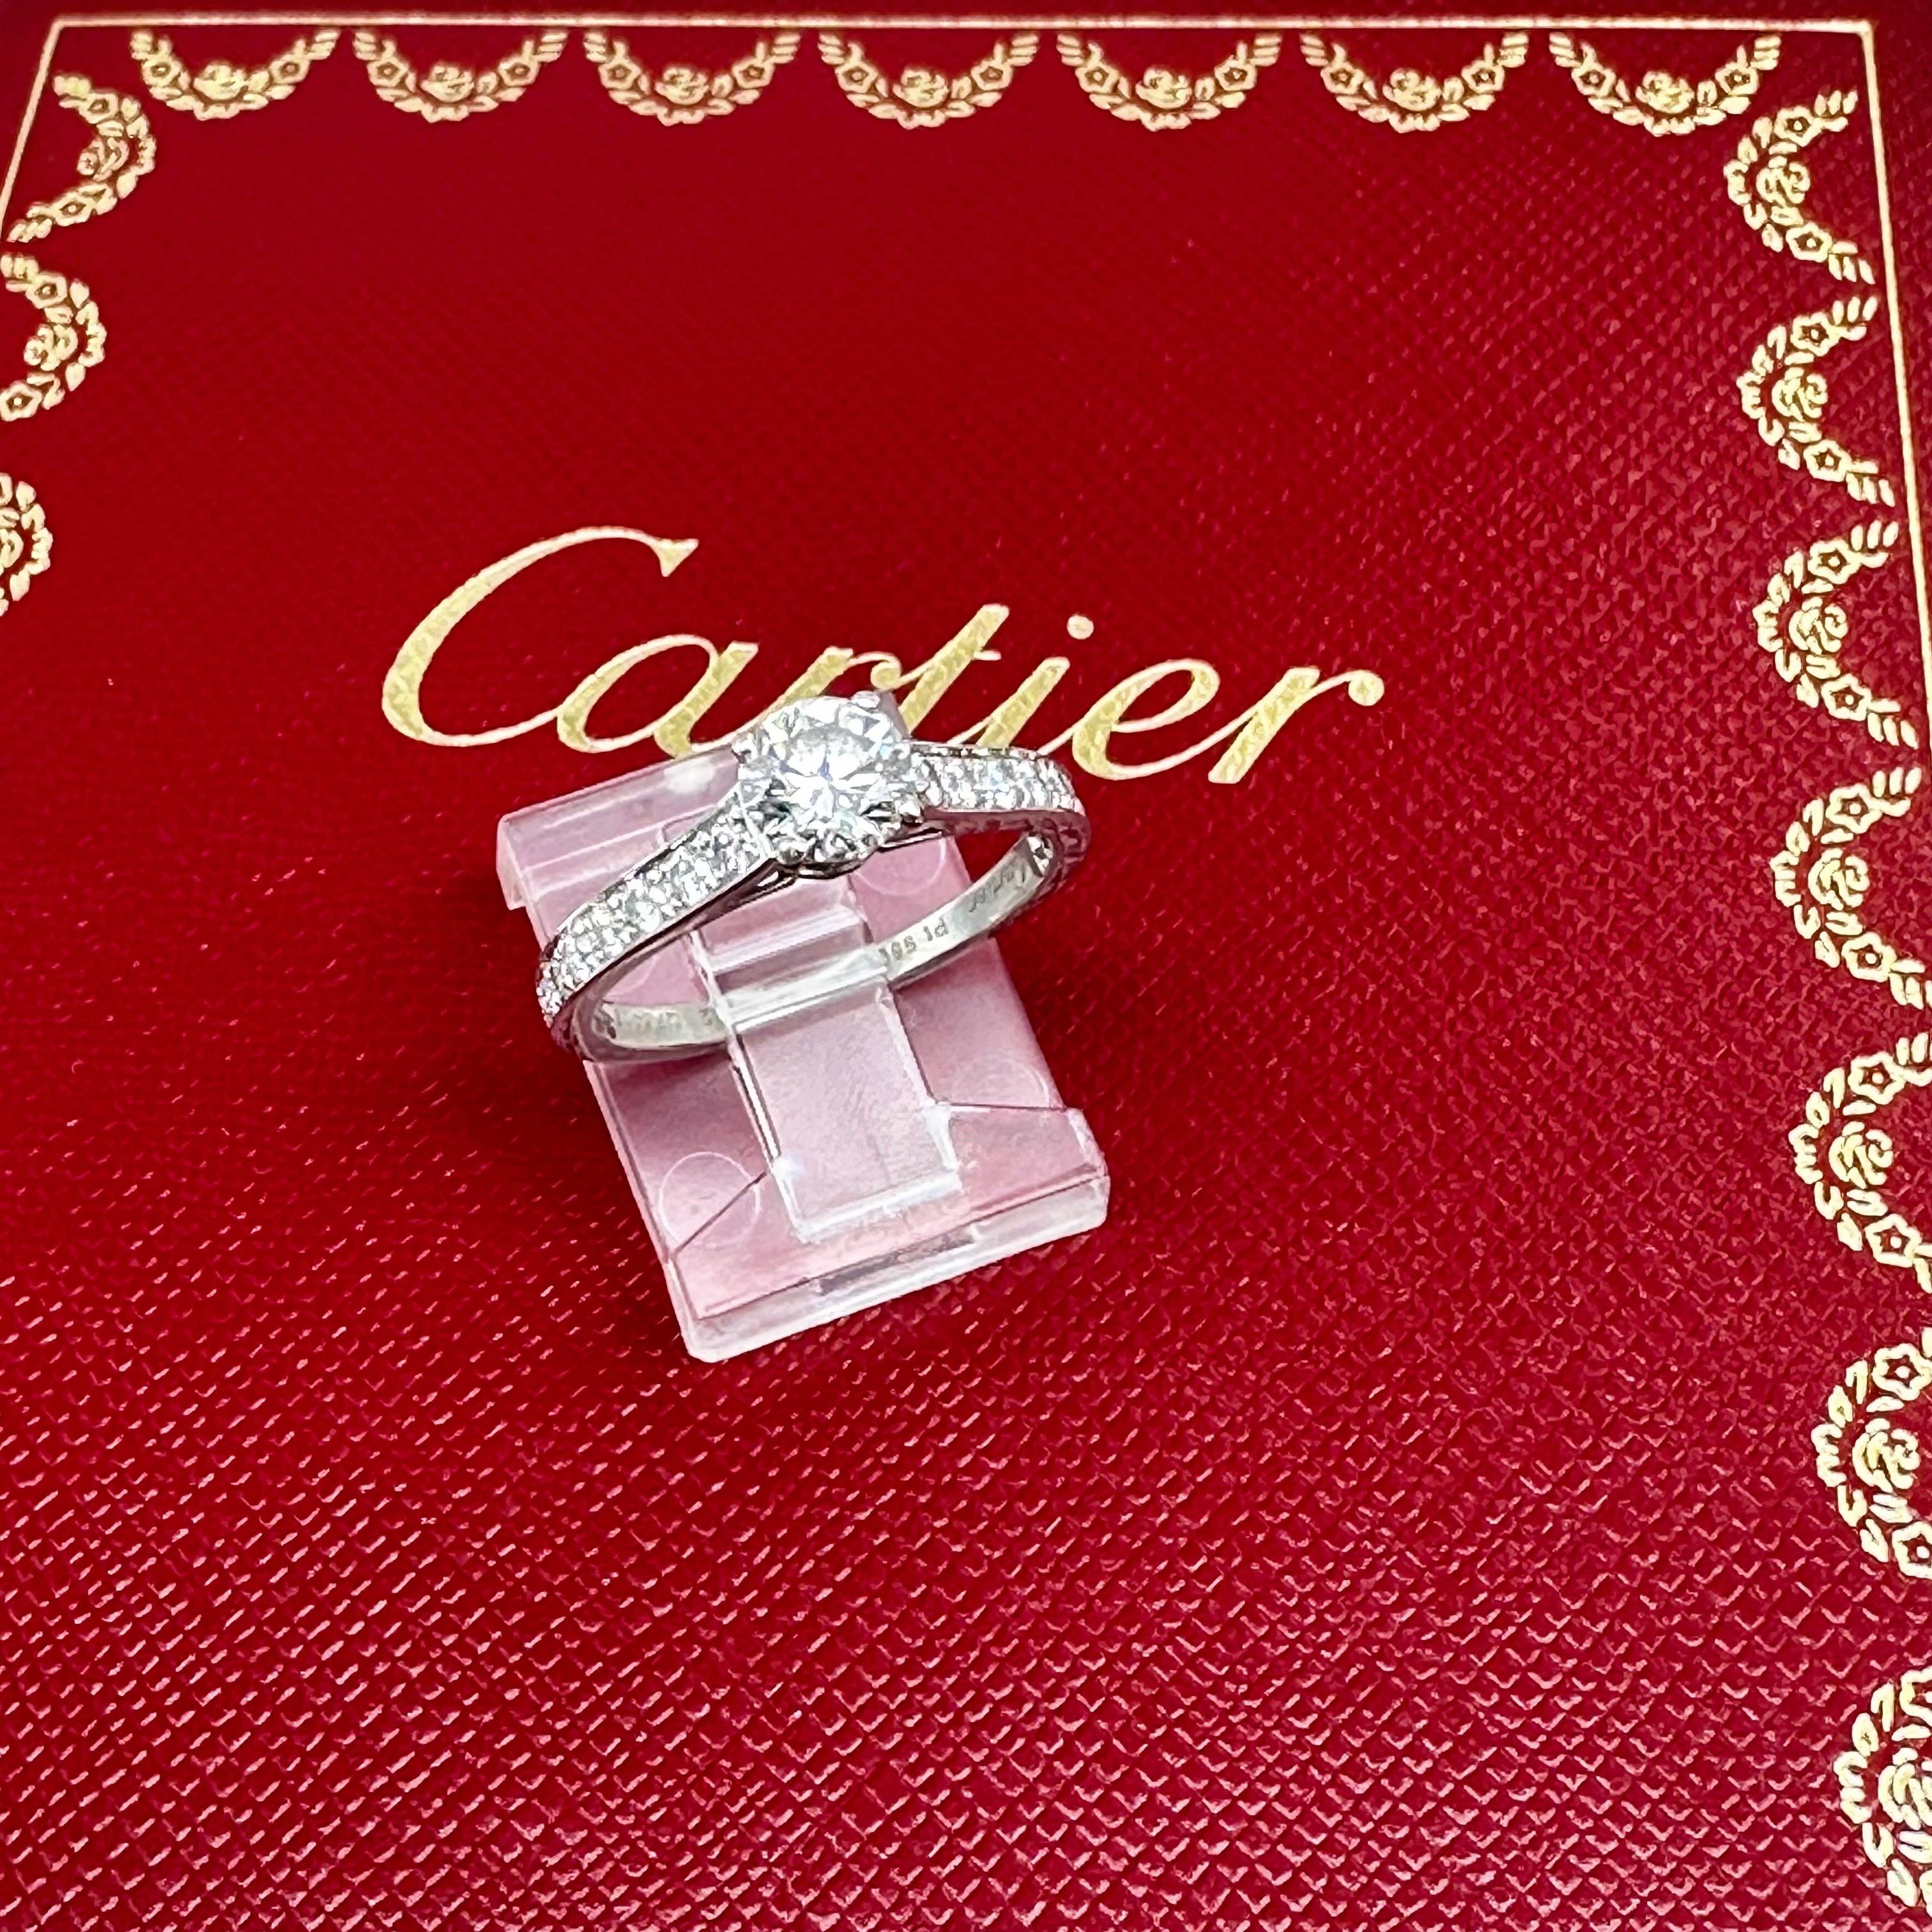 Cartier 1895 Round Diamond 0.88 tcw Engagement Ring in Platinum GIA COA Box For Sale 5